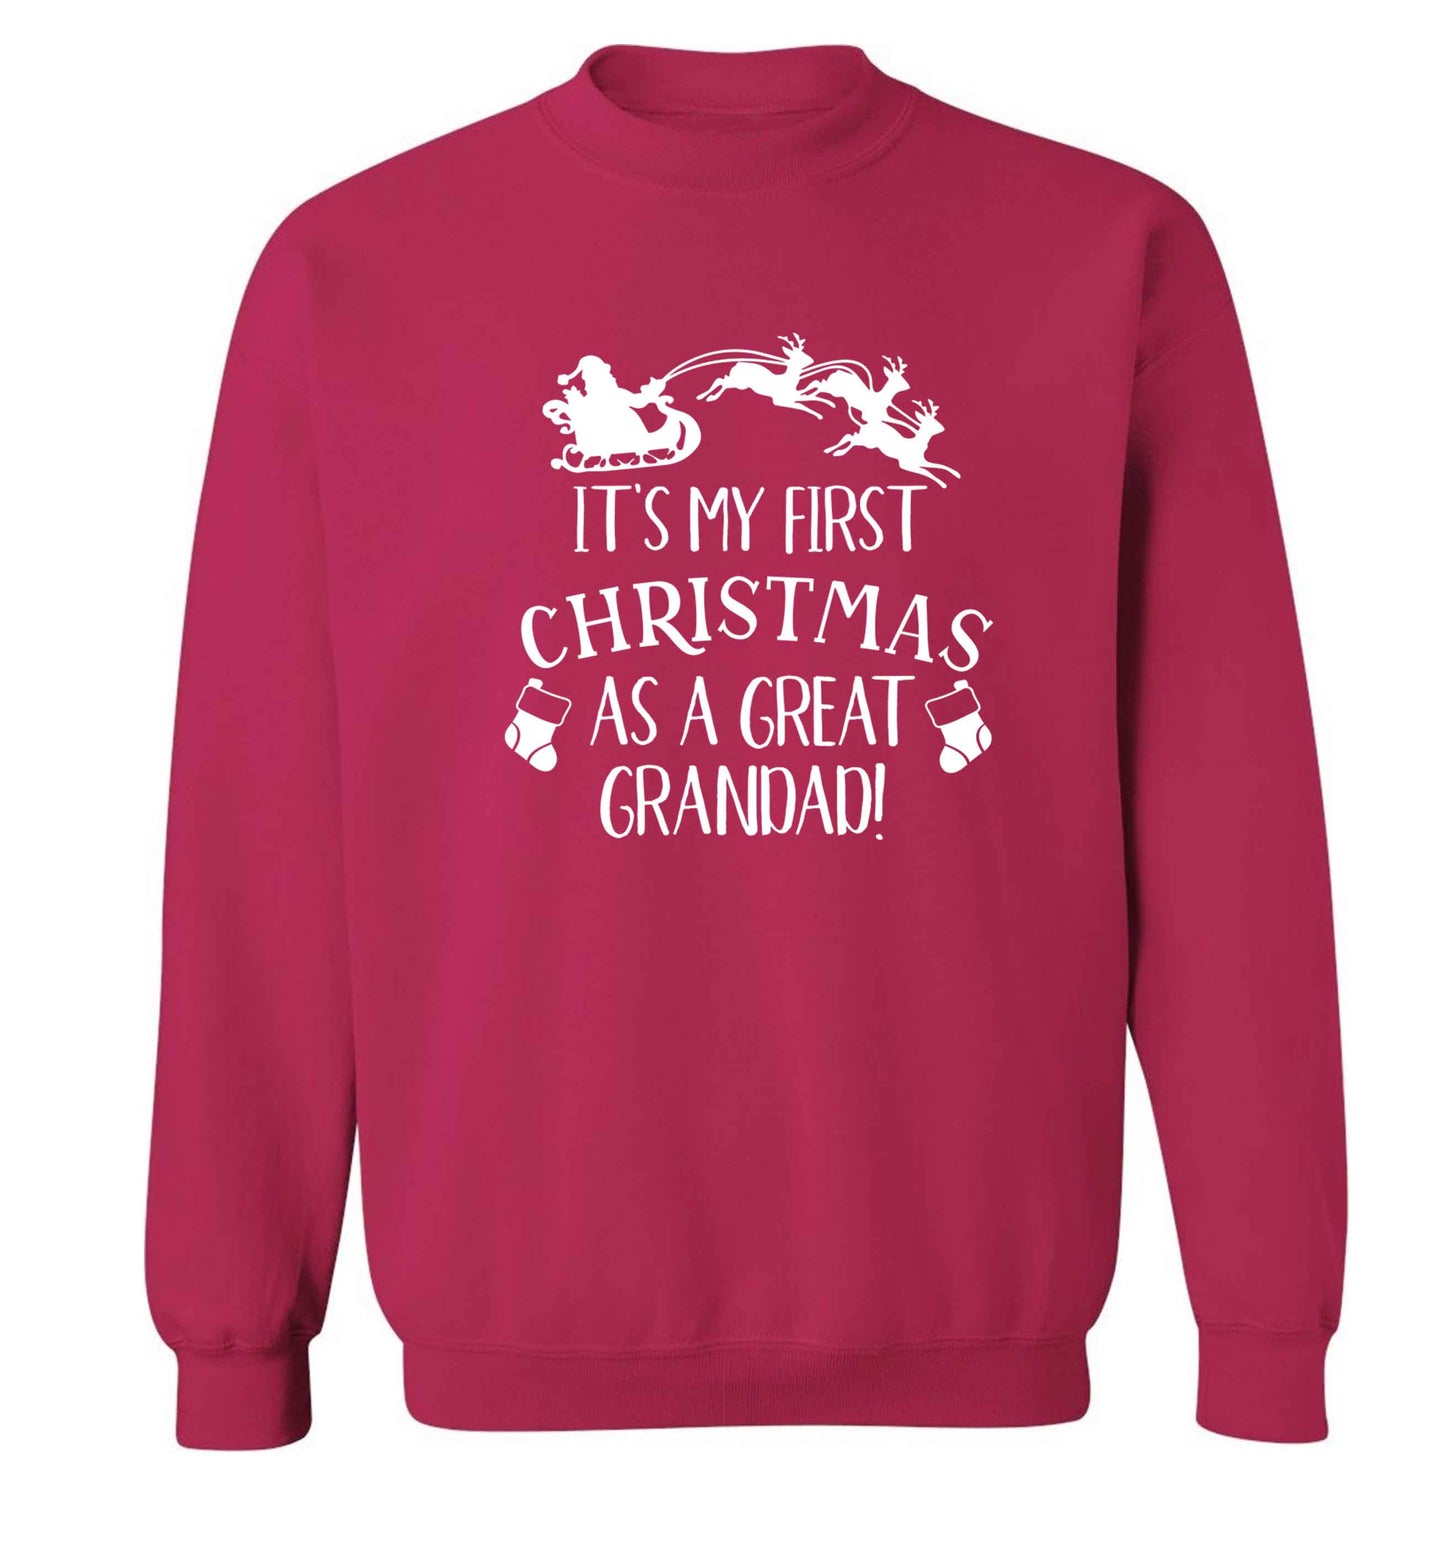 It's my first Christmas as a great grandad! Adult's unisex pink Sweater 2XL